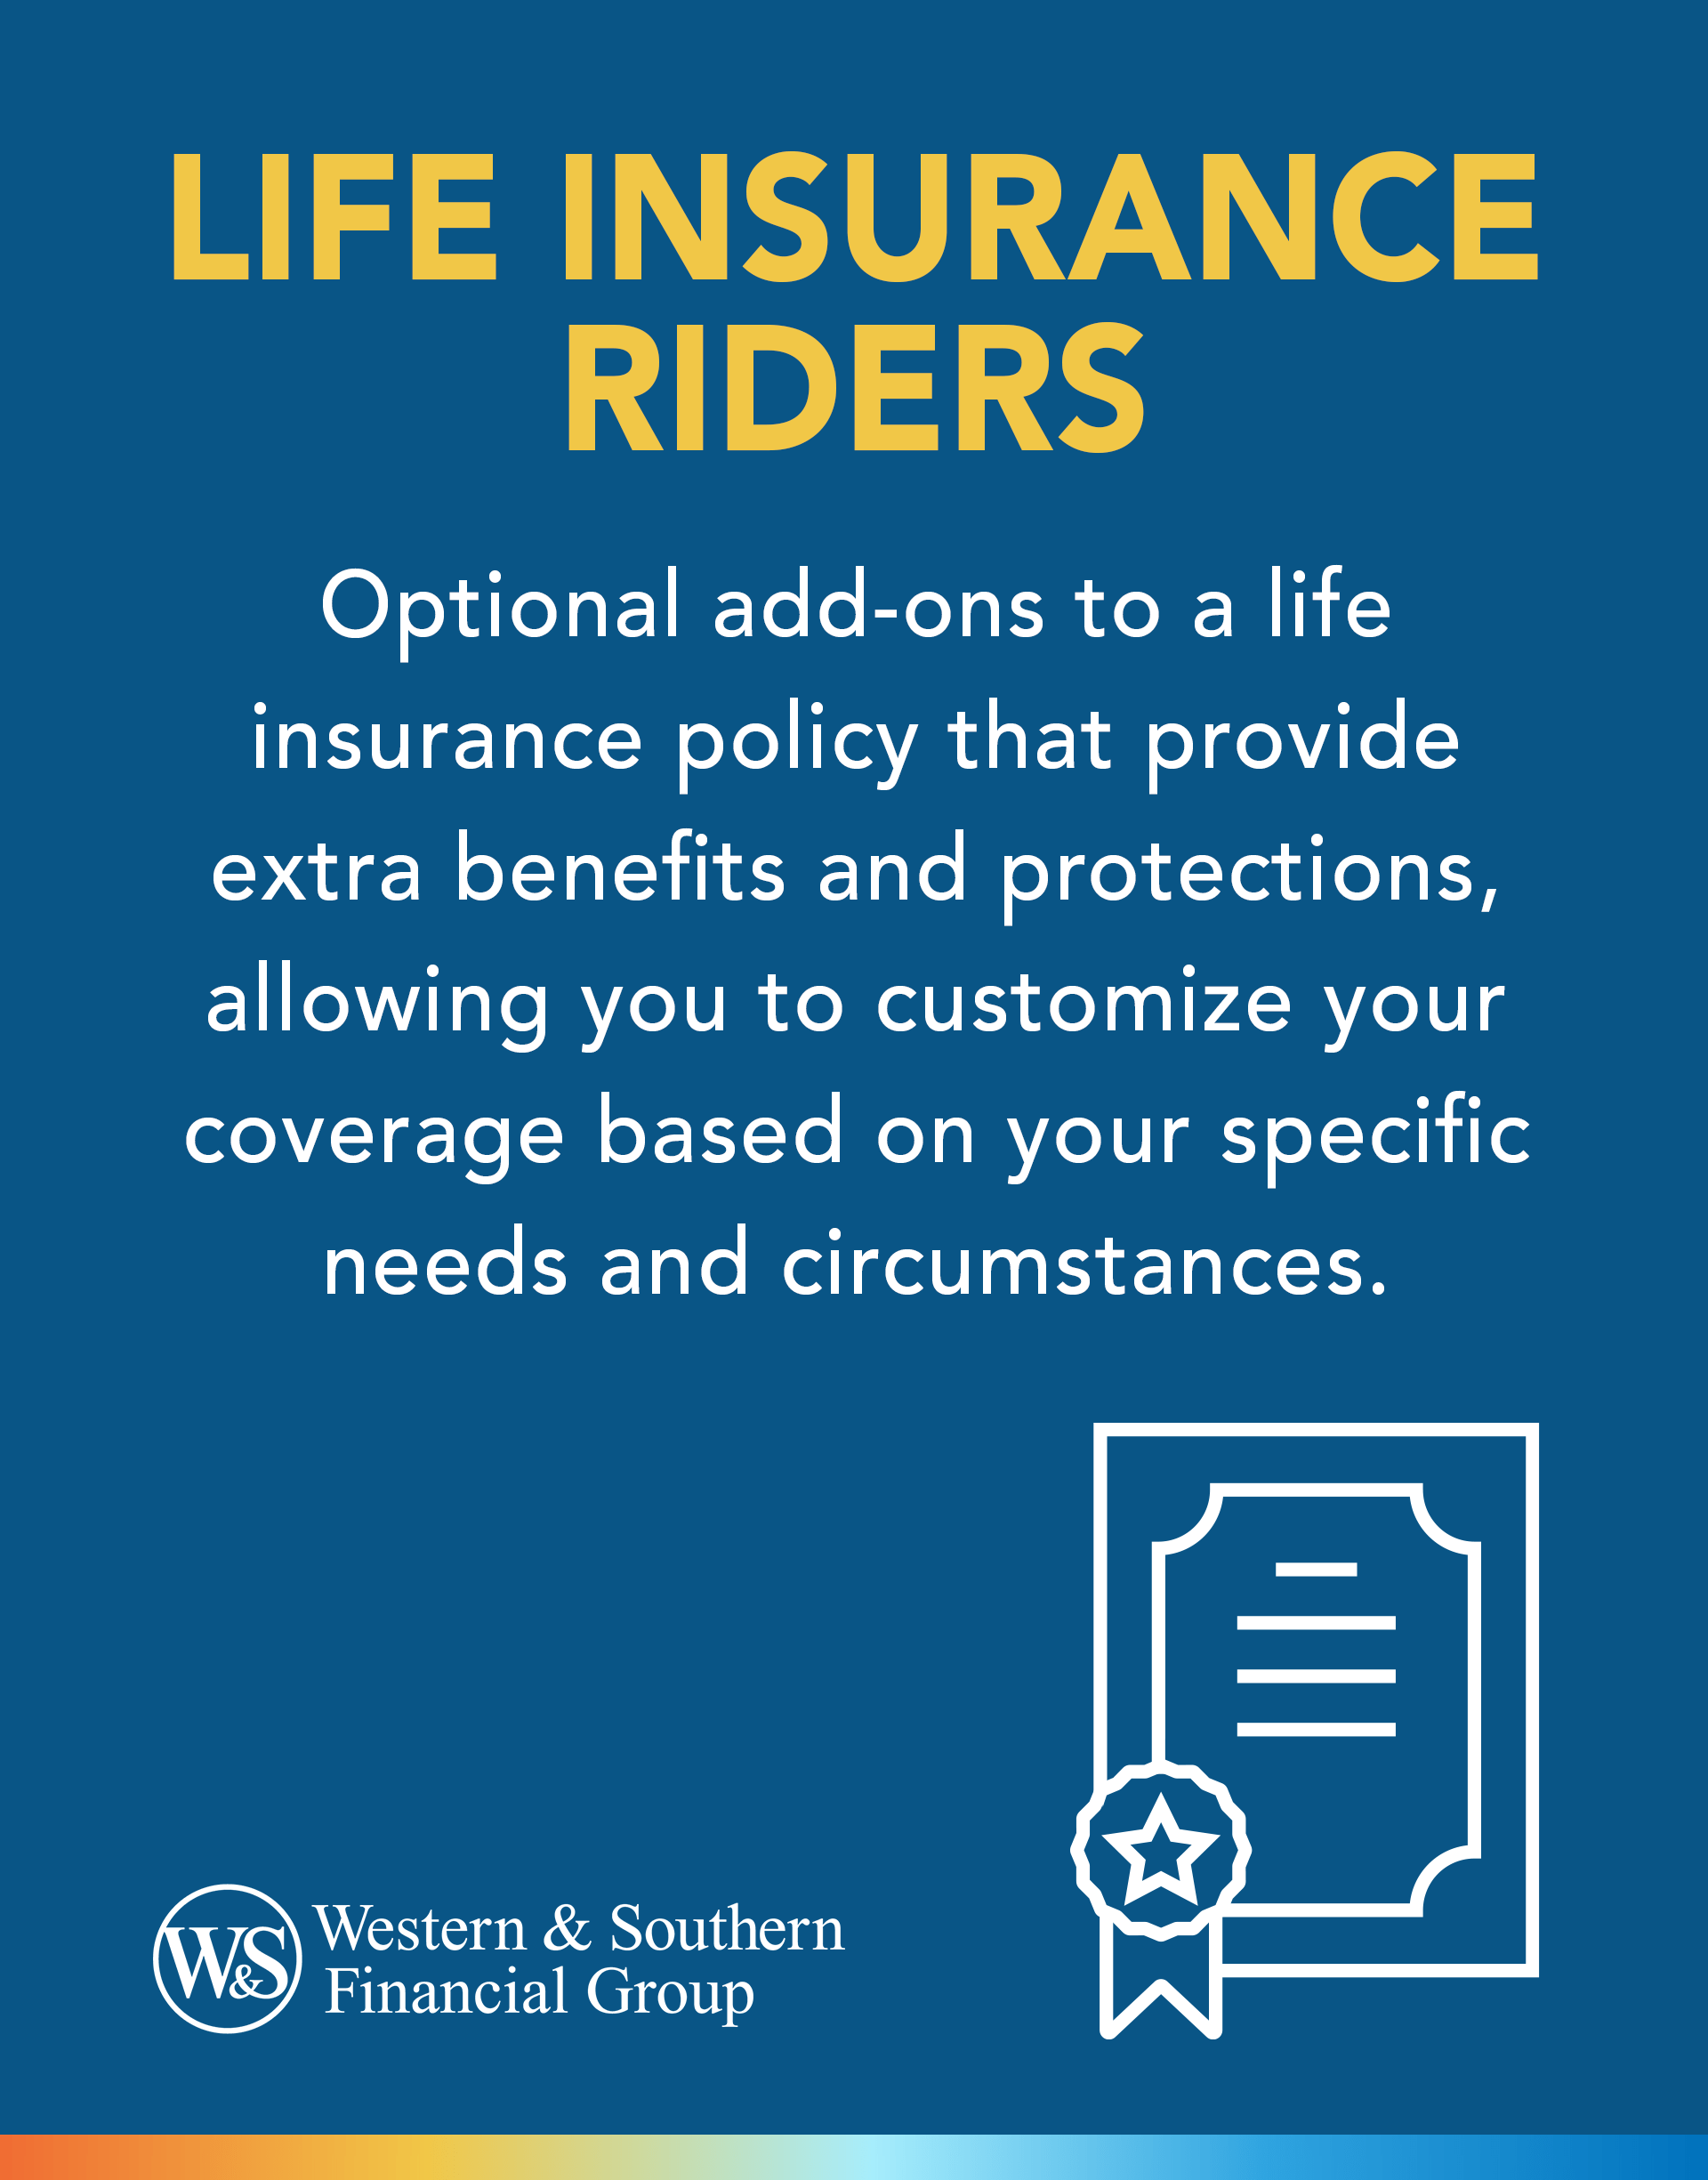 Life Insurance Riders Definition